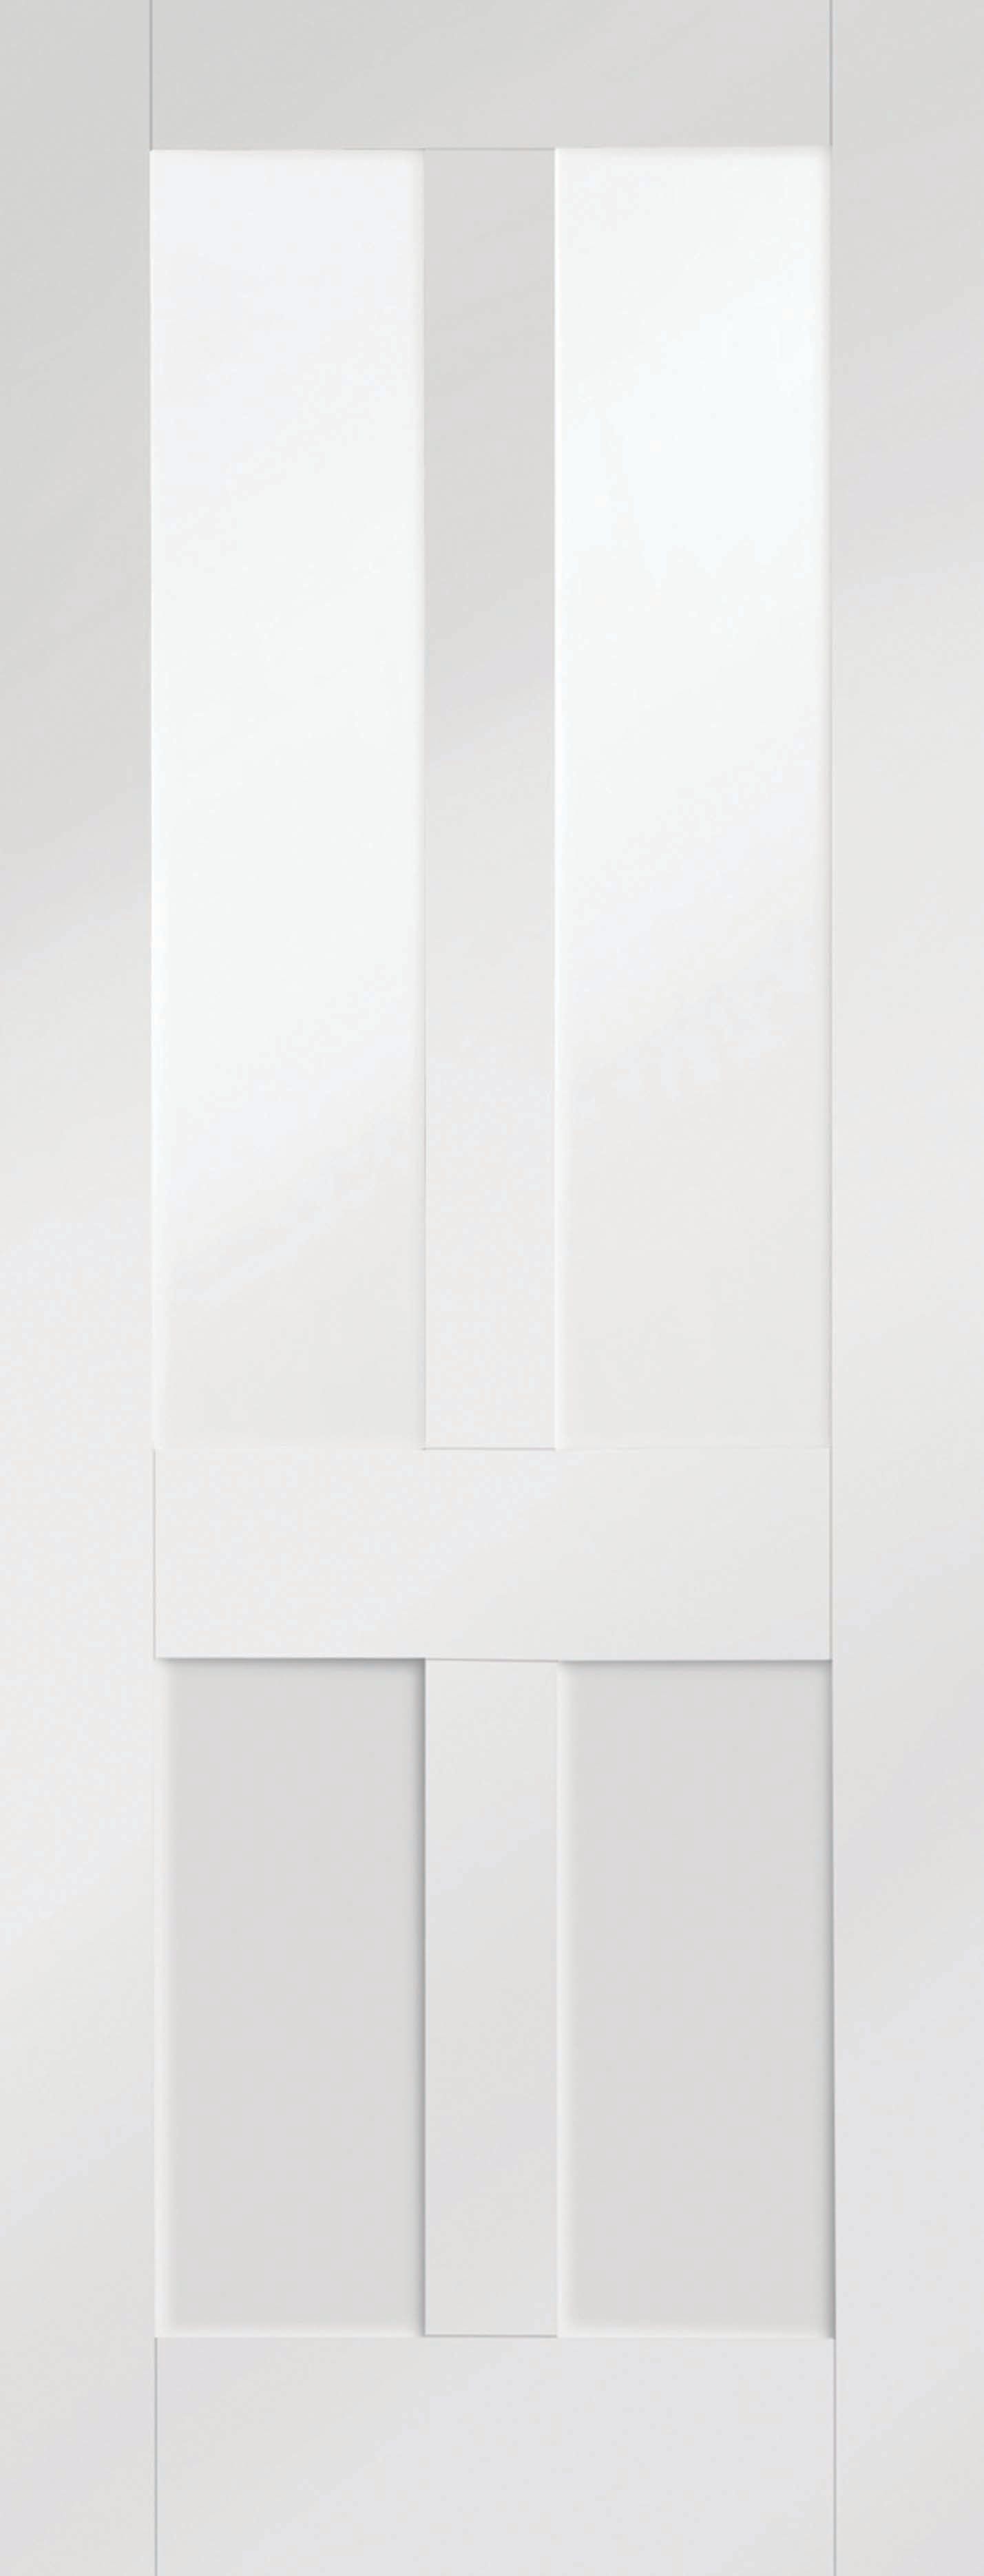 Image of XL Joinery Victorian/Malton White Glazed Softwood 4 Panel Internal Door - 1981 x 762mm